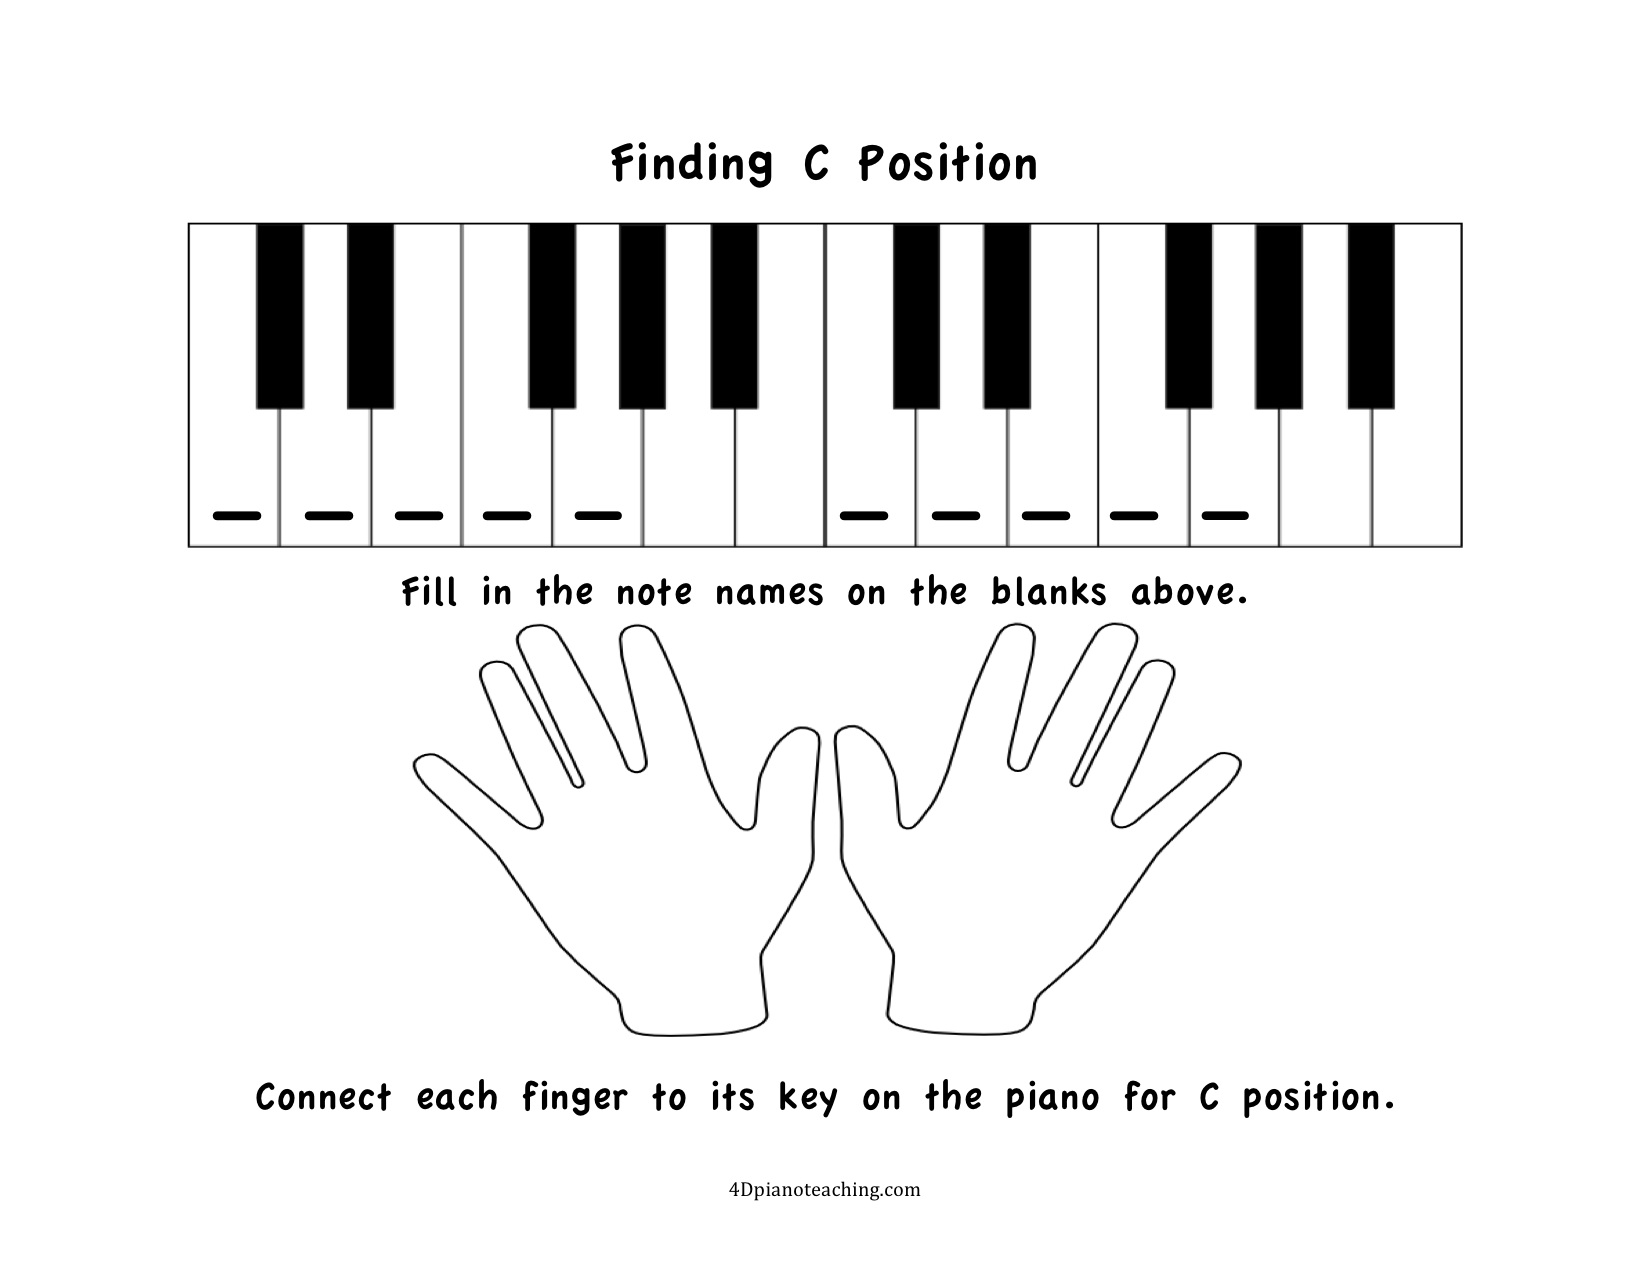 Free Printables C Position Worksheets 4dpianoteaching